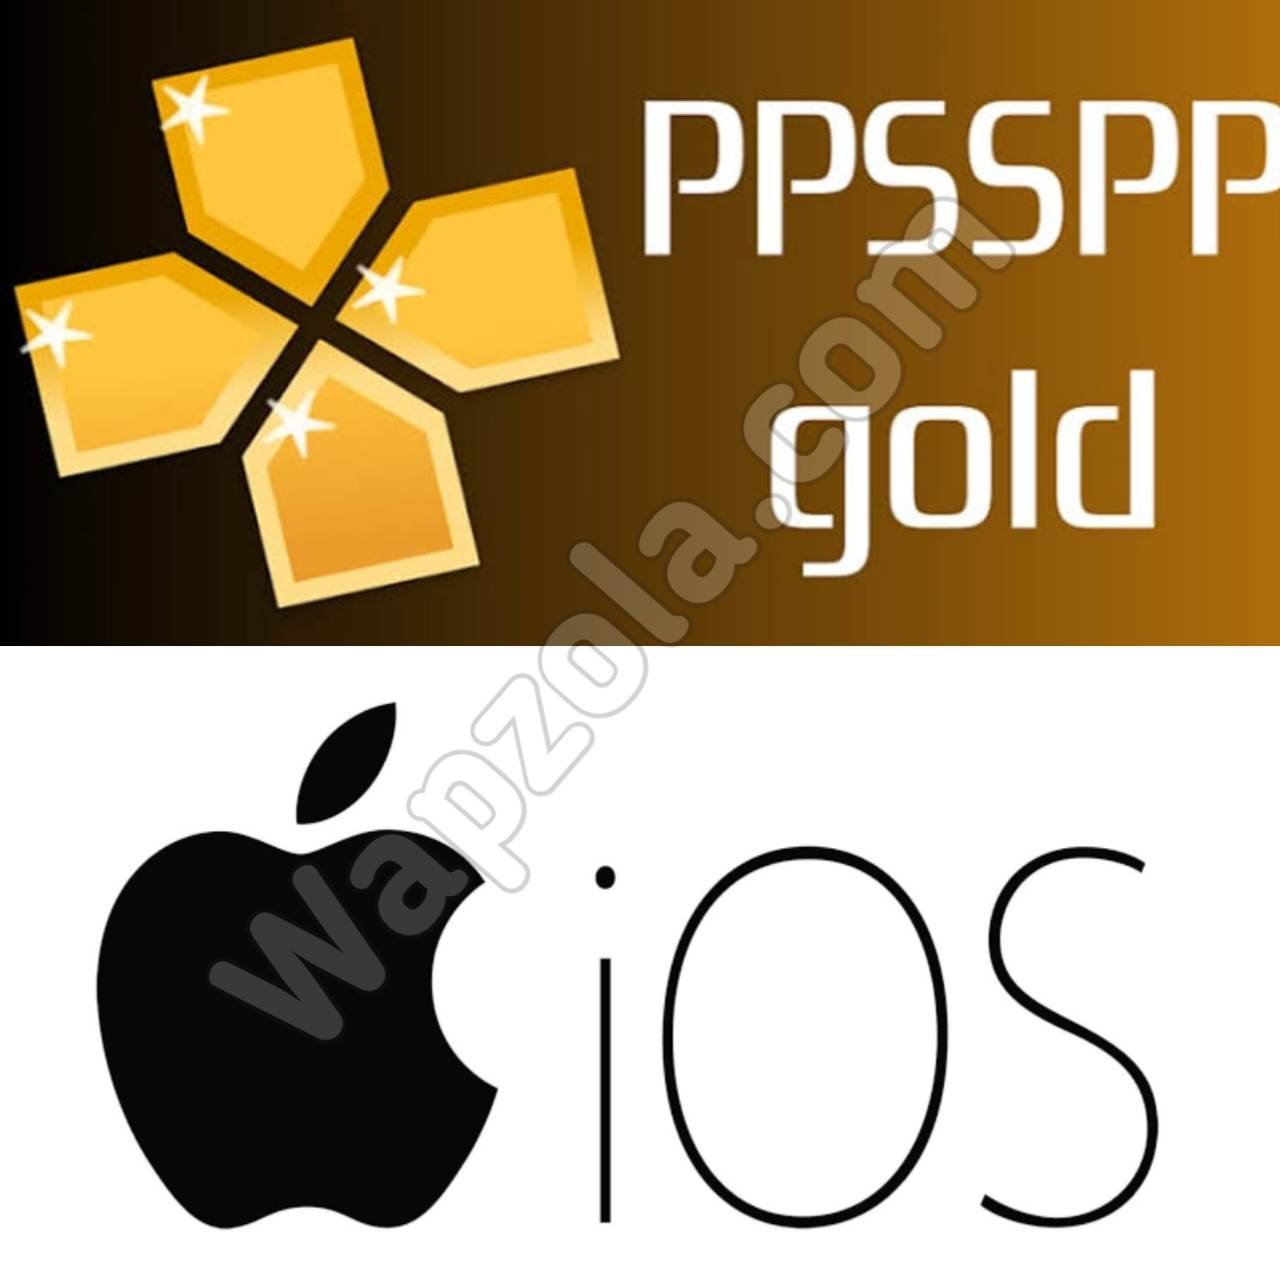 You are currently viewing How to Download and install PPSSPP GOLD iOS – PSP Emulator iPhone and iPad (No jailbreak Needed)